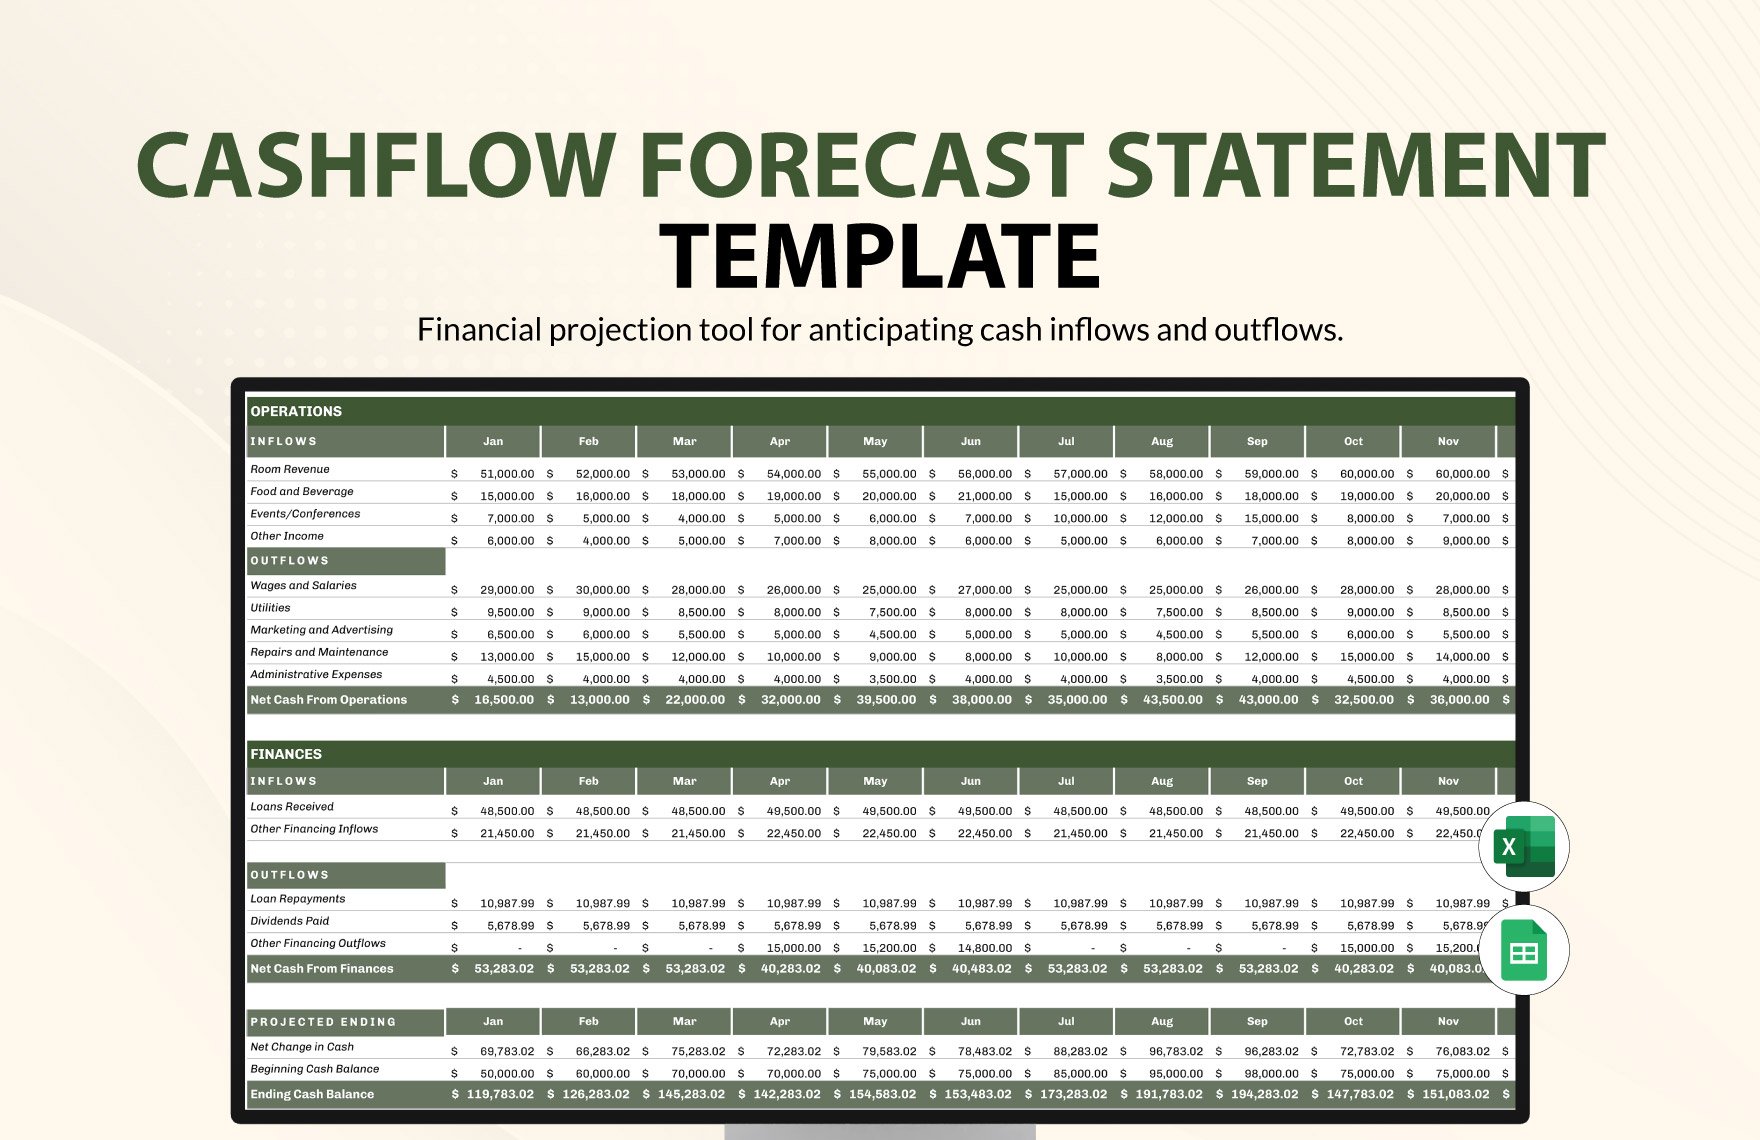 Cashflow Forecast Statement Template in Excel, Google Sheets